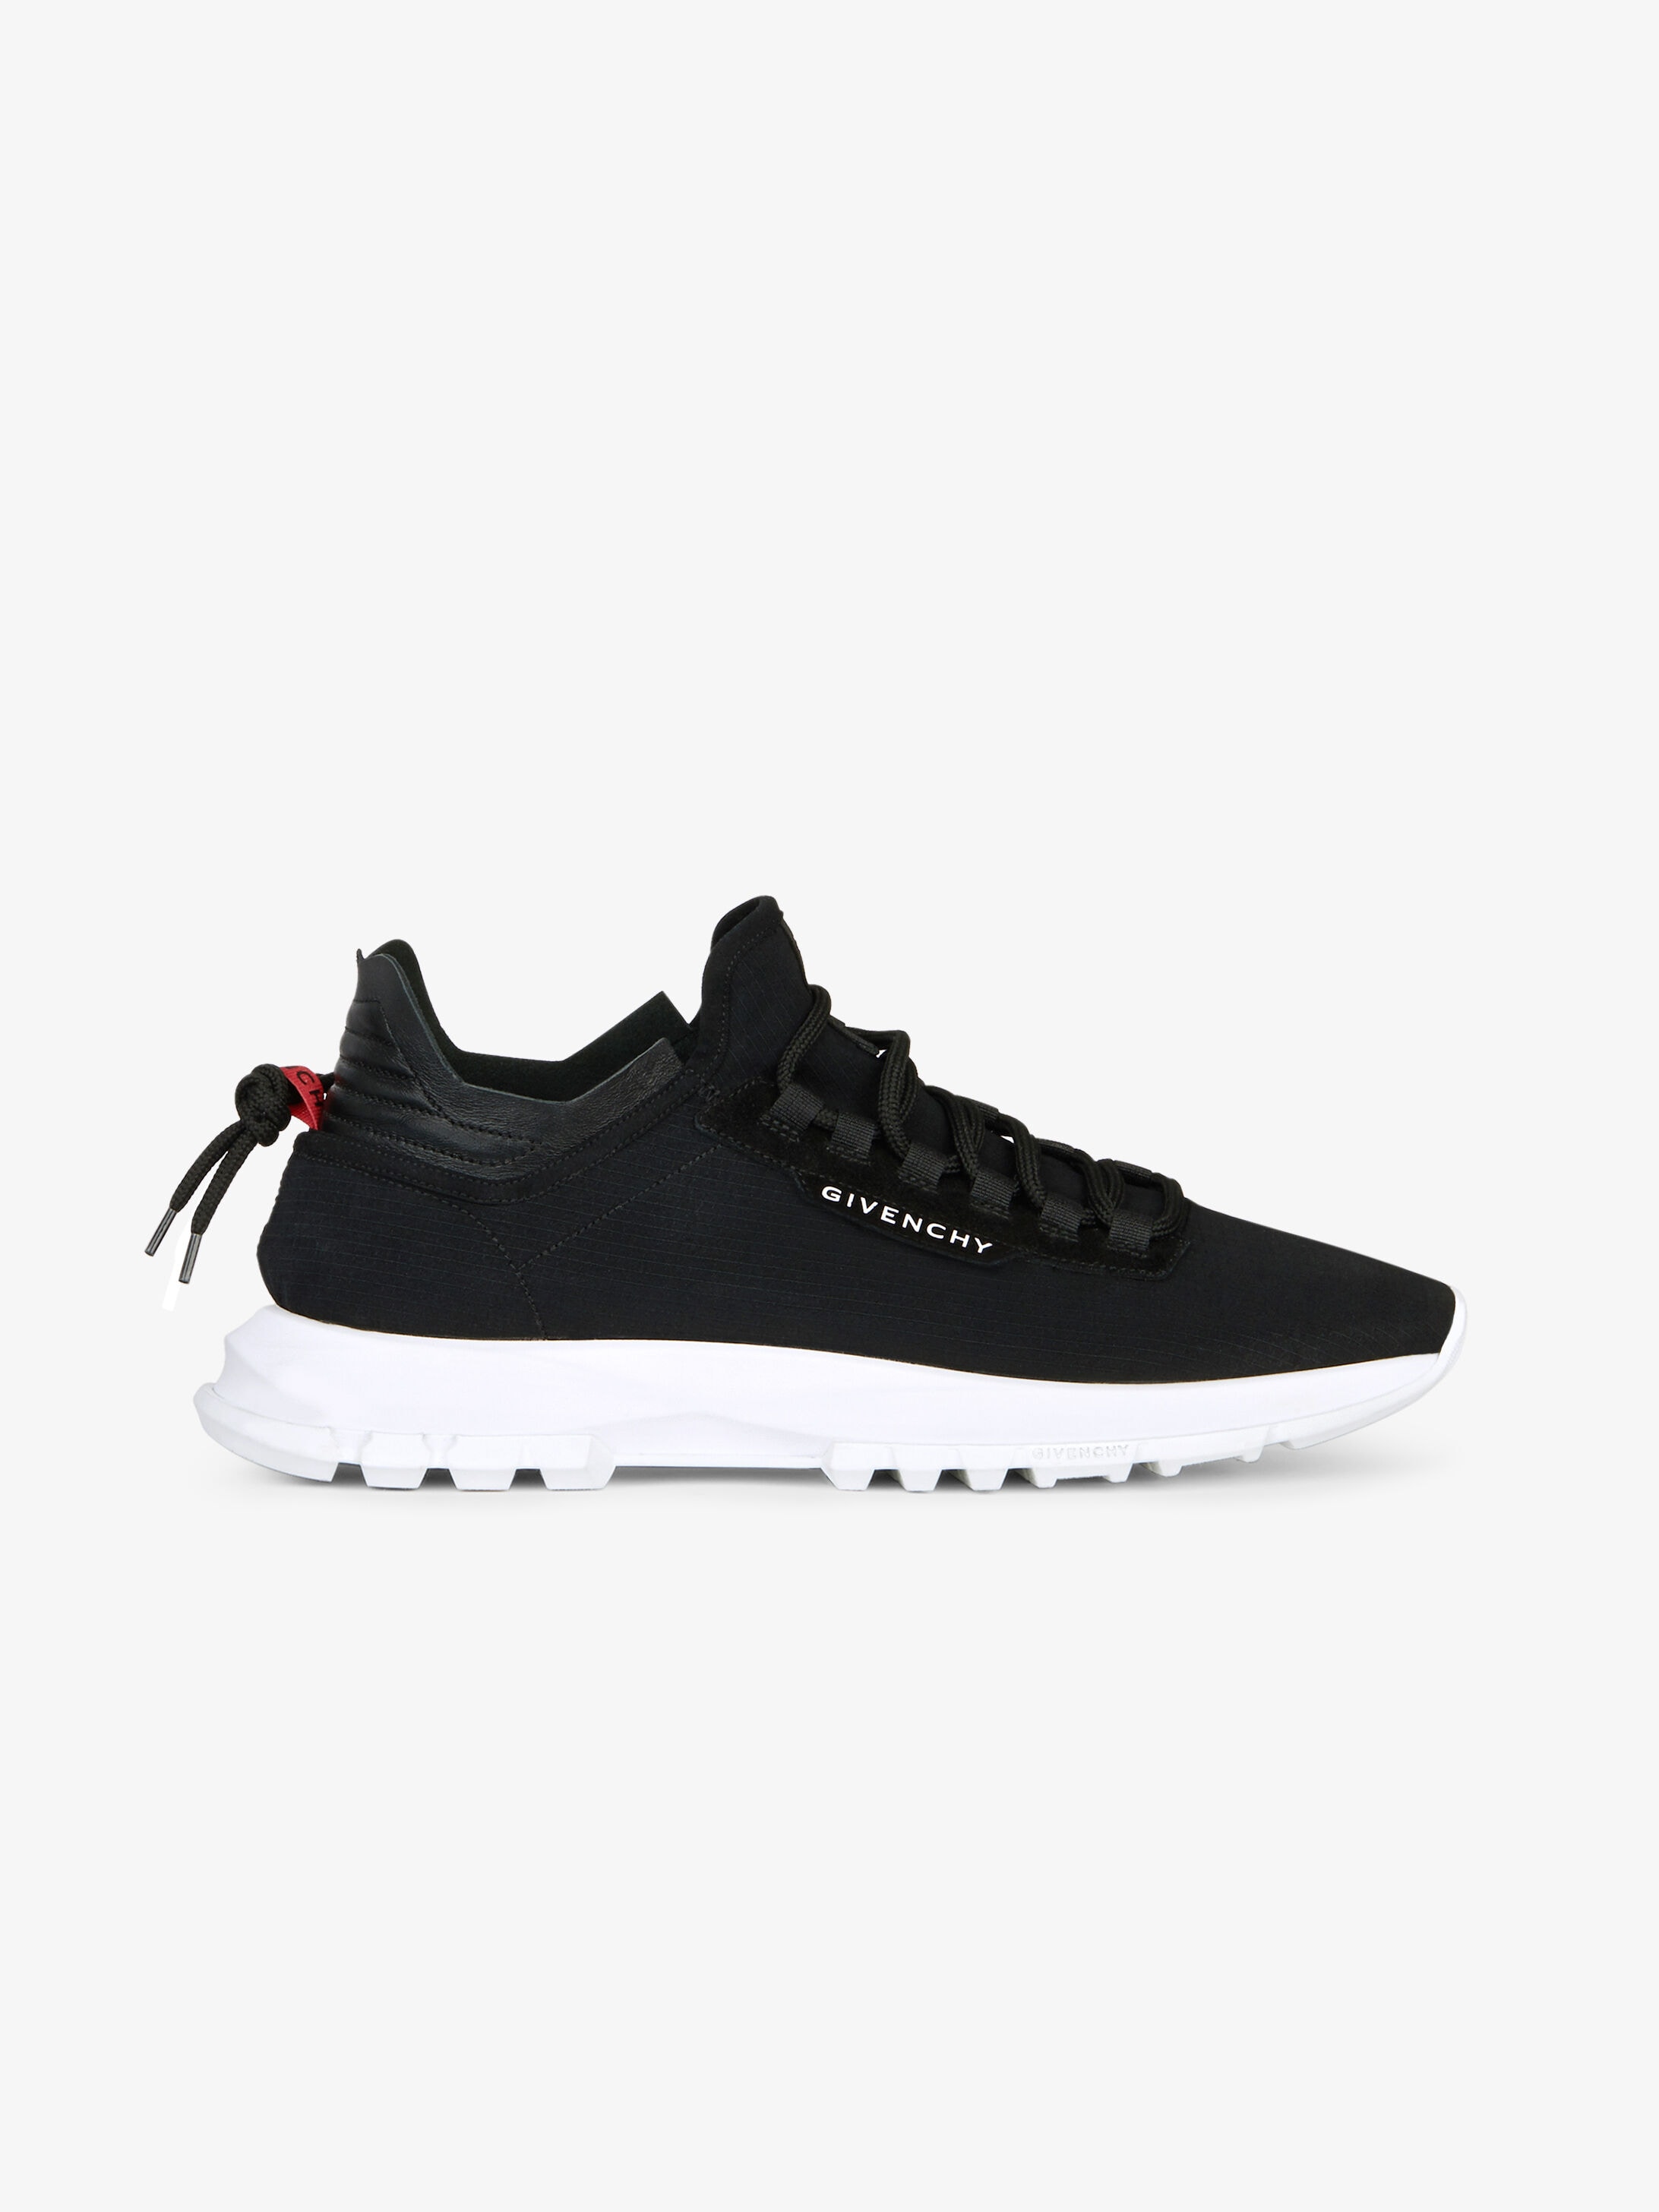 mens givenchy runners